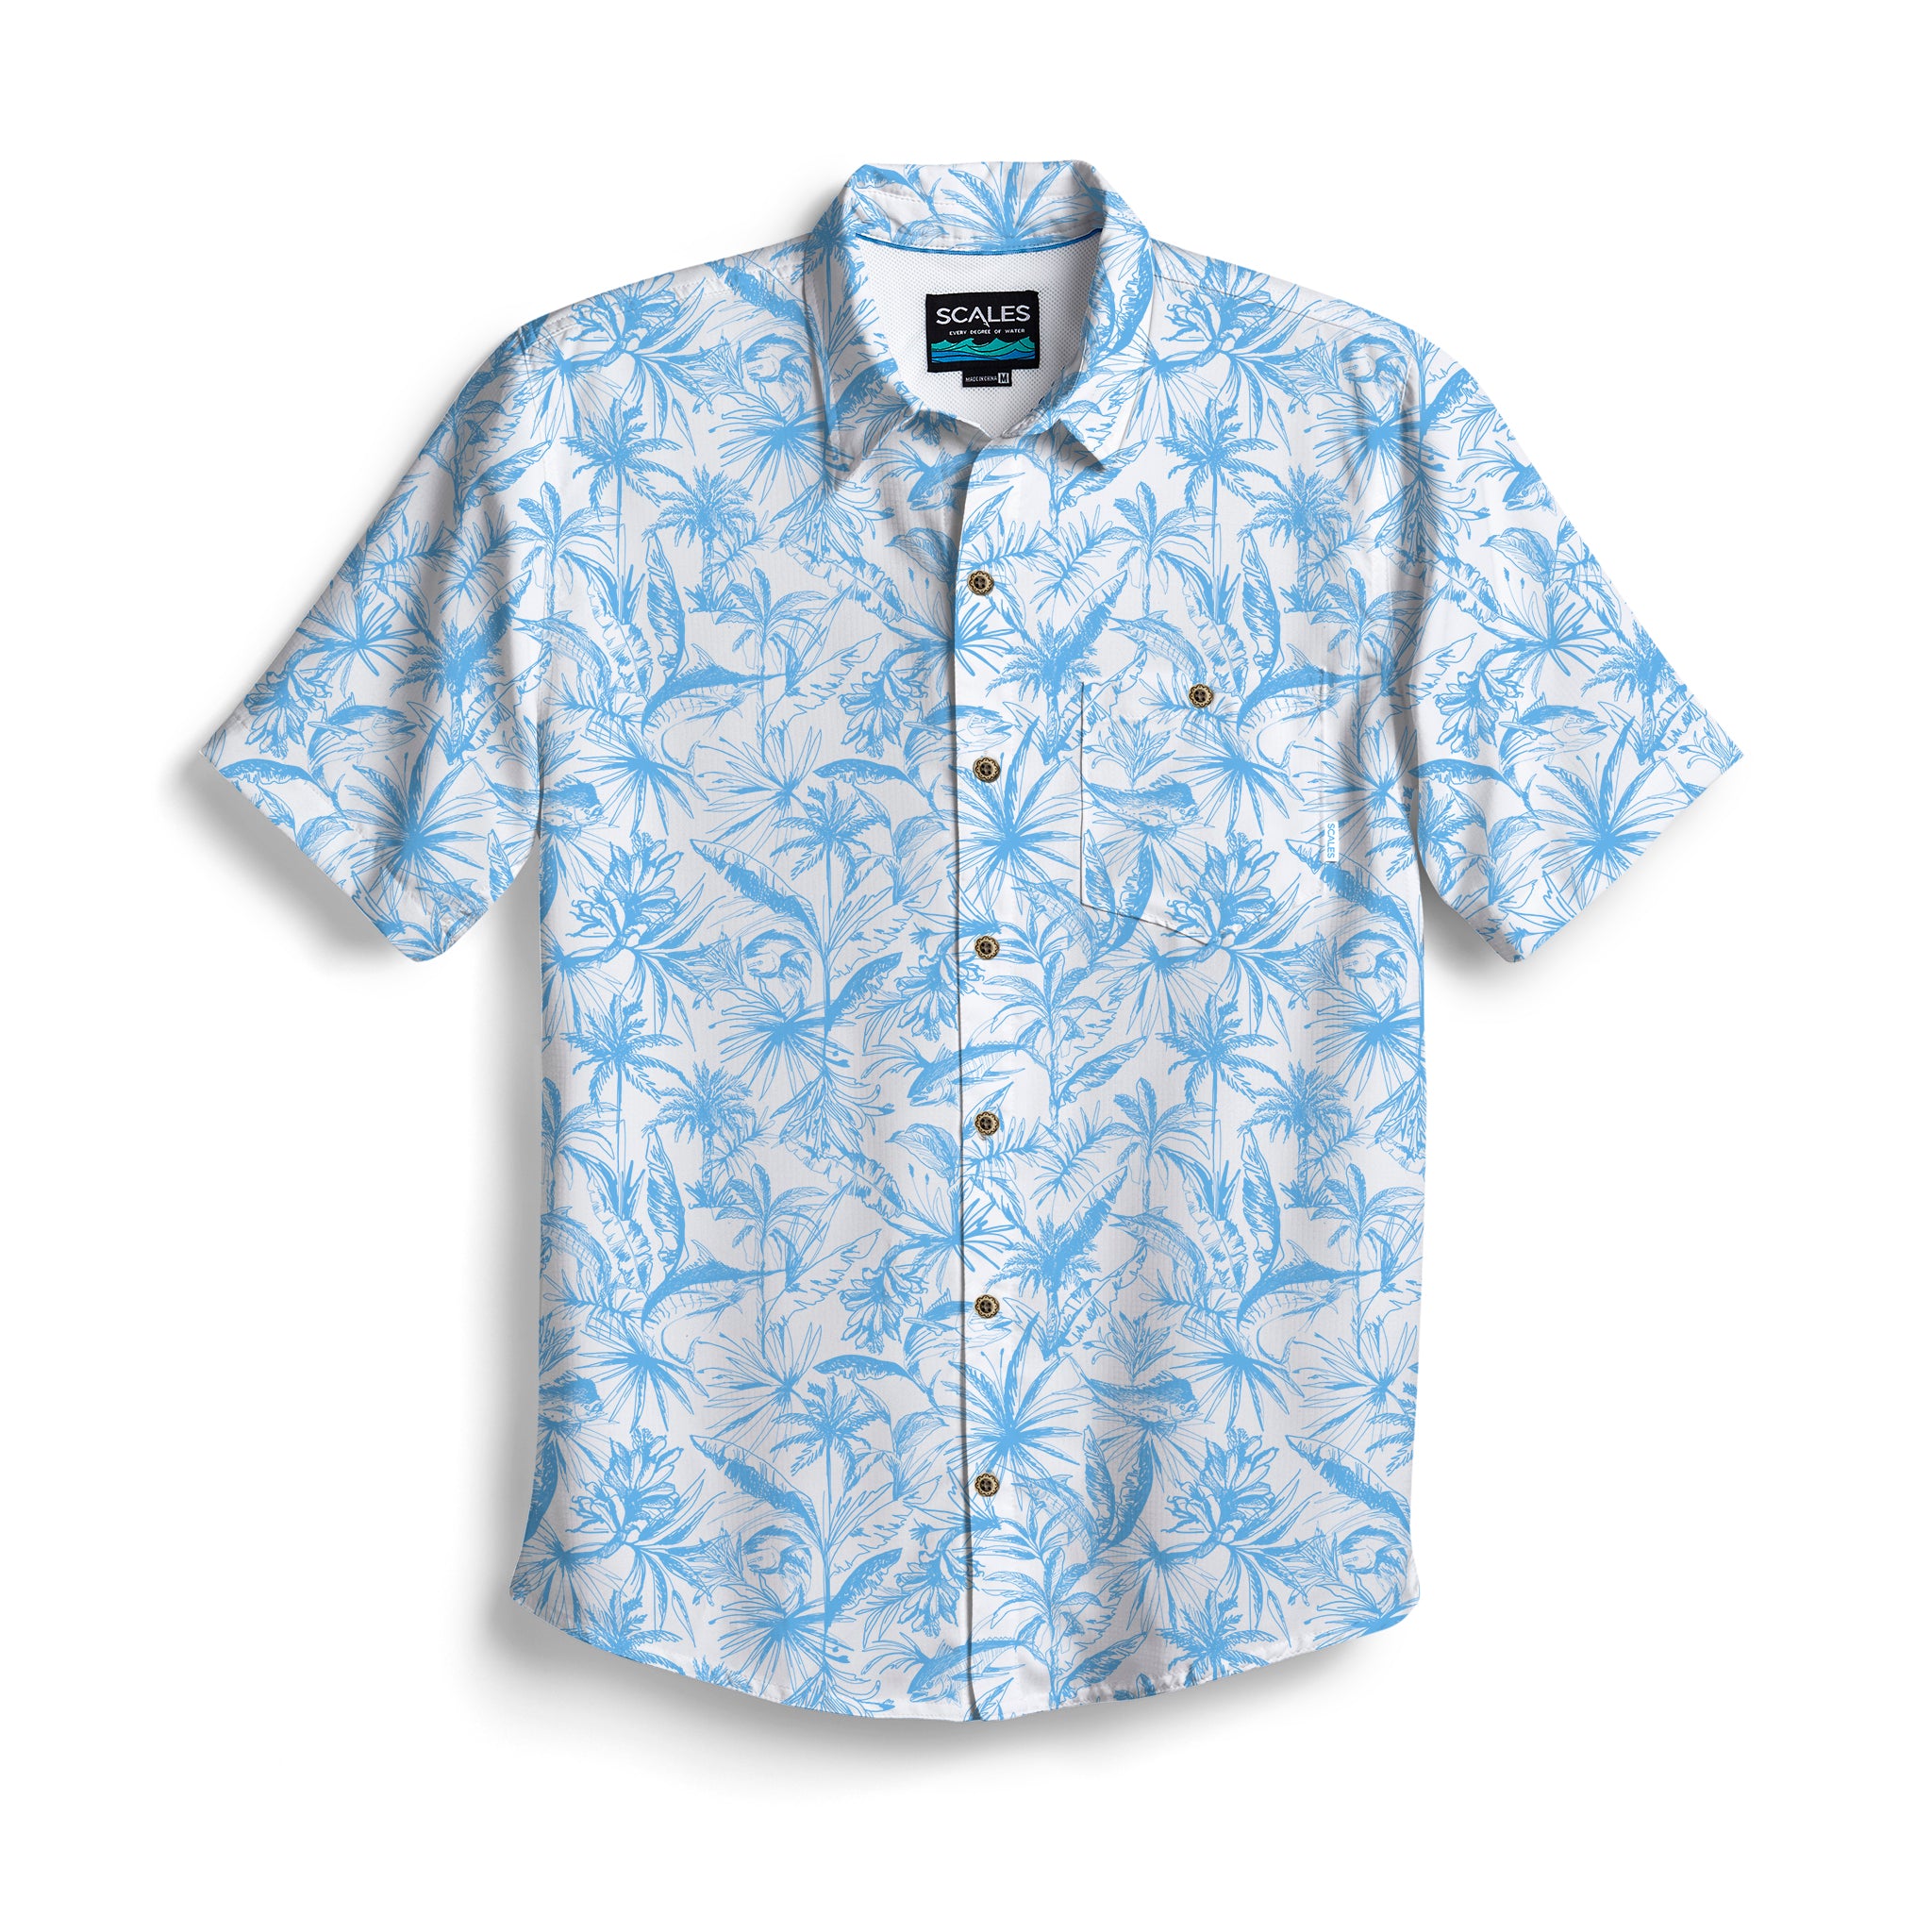 Scales Loose Lines Button Down in White / Powder Blue Size XL